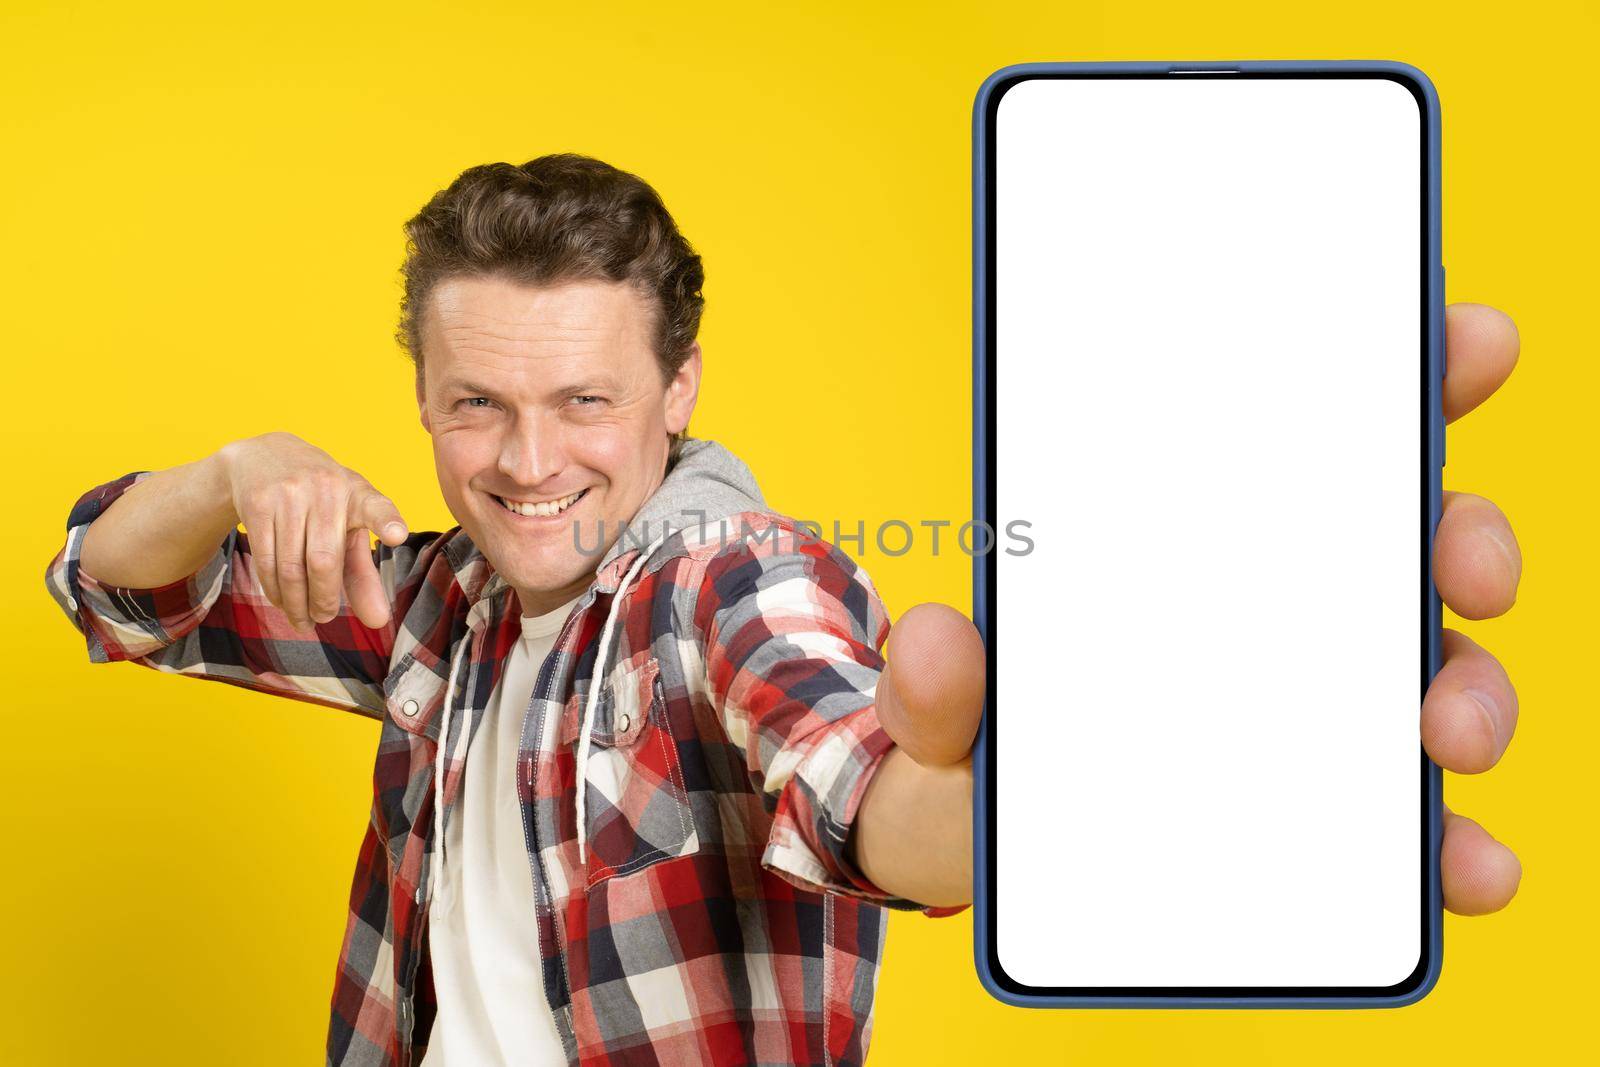 Pointing at big smartphone in hand with white screen blond caucasian man, wearing red plaid shirt. Man with phone display mock up isolated on yellow background. Mobile app advertisement.